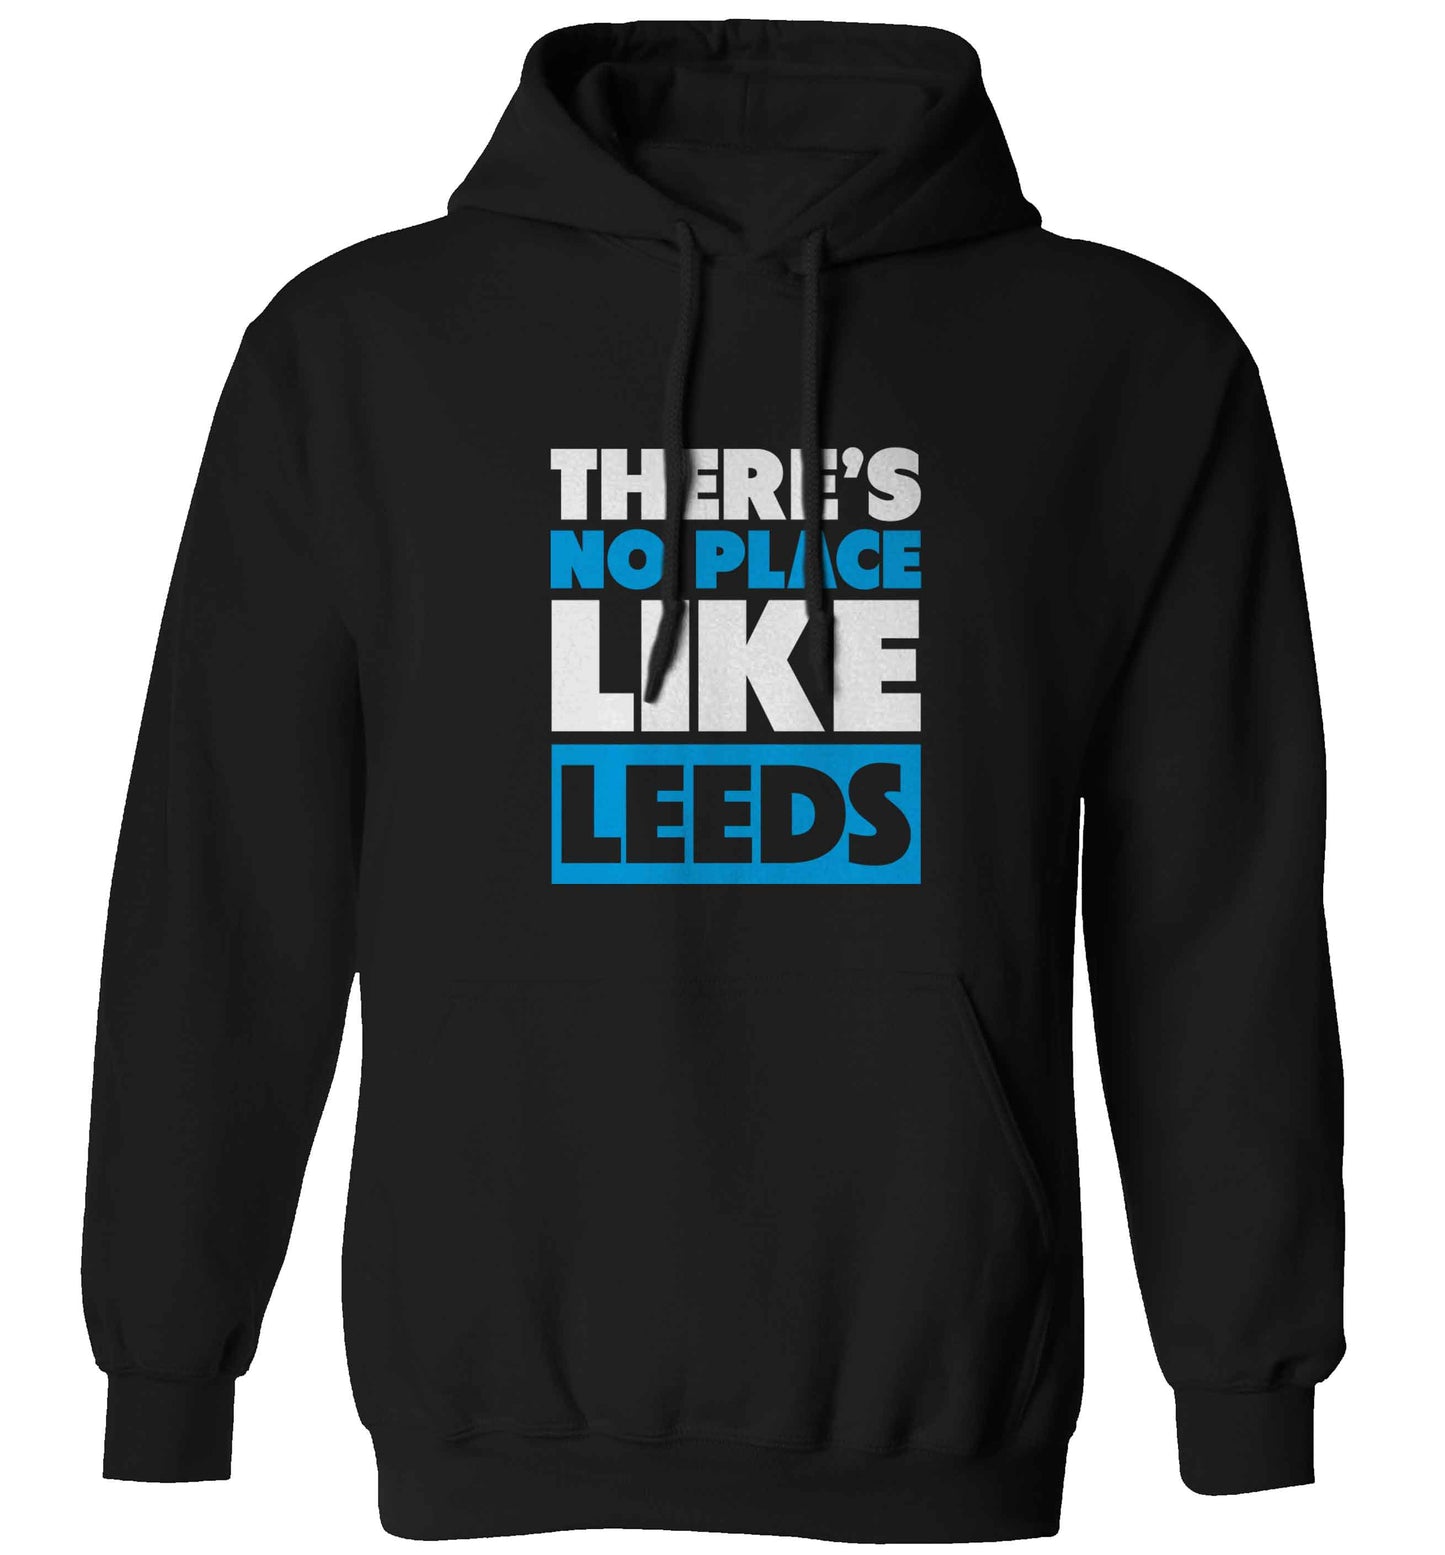 There's no place like Leeds adults unisex black hoodie 2XL